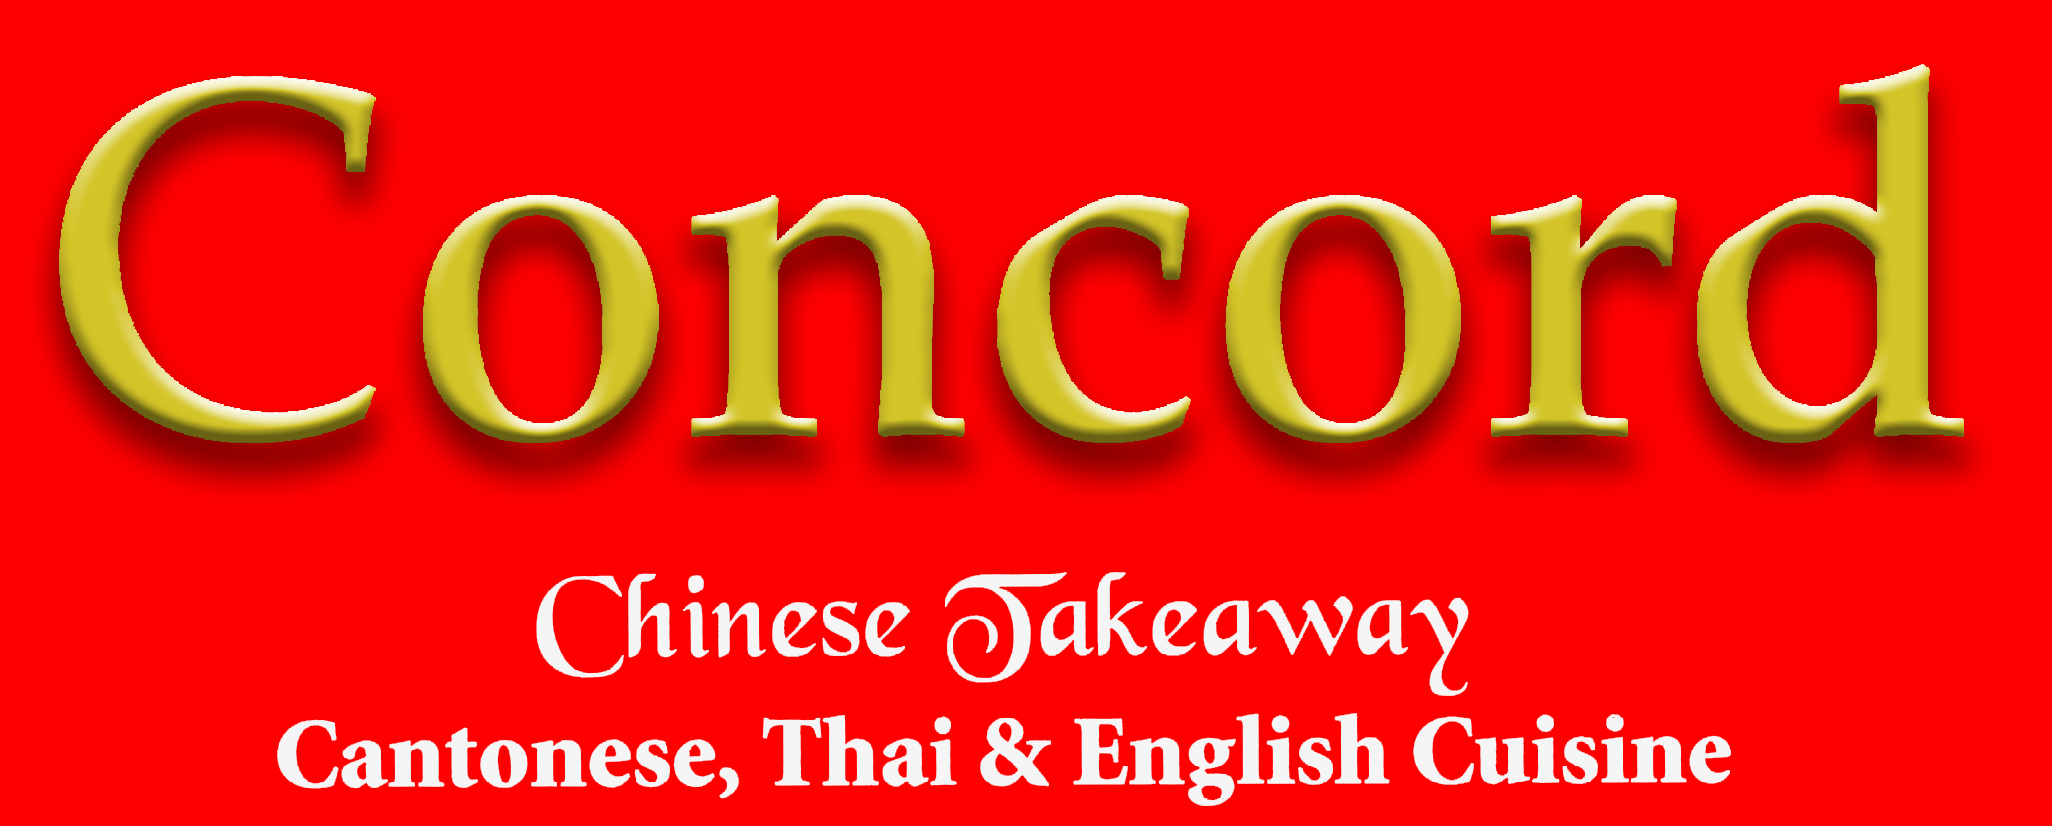 Concord Chinese Takeaway Logo